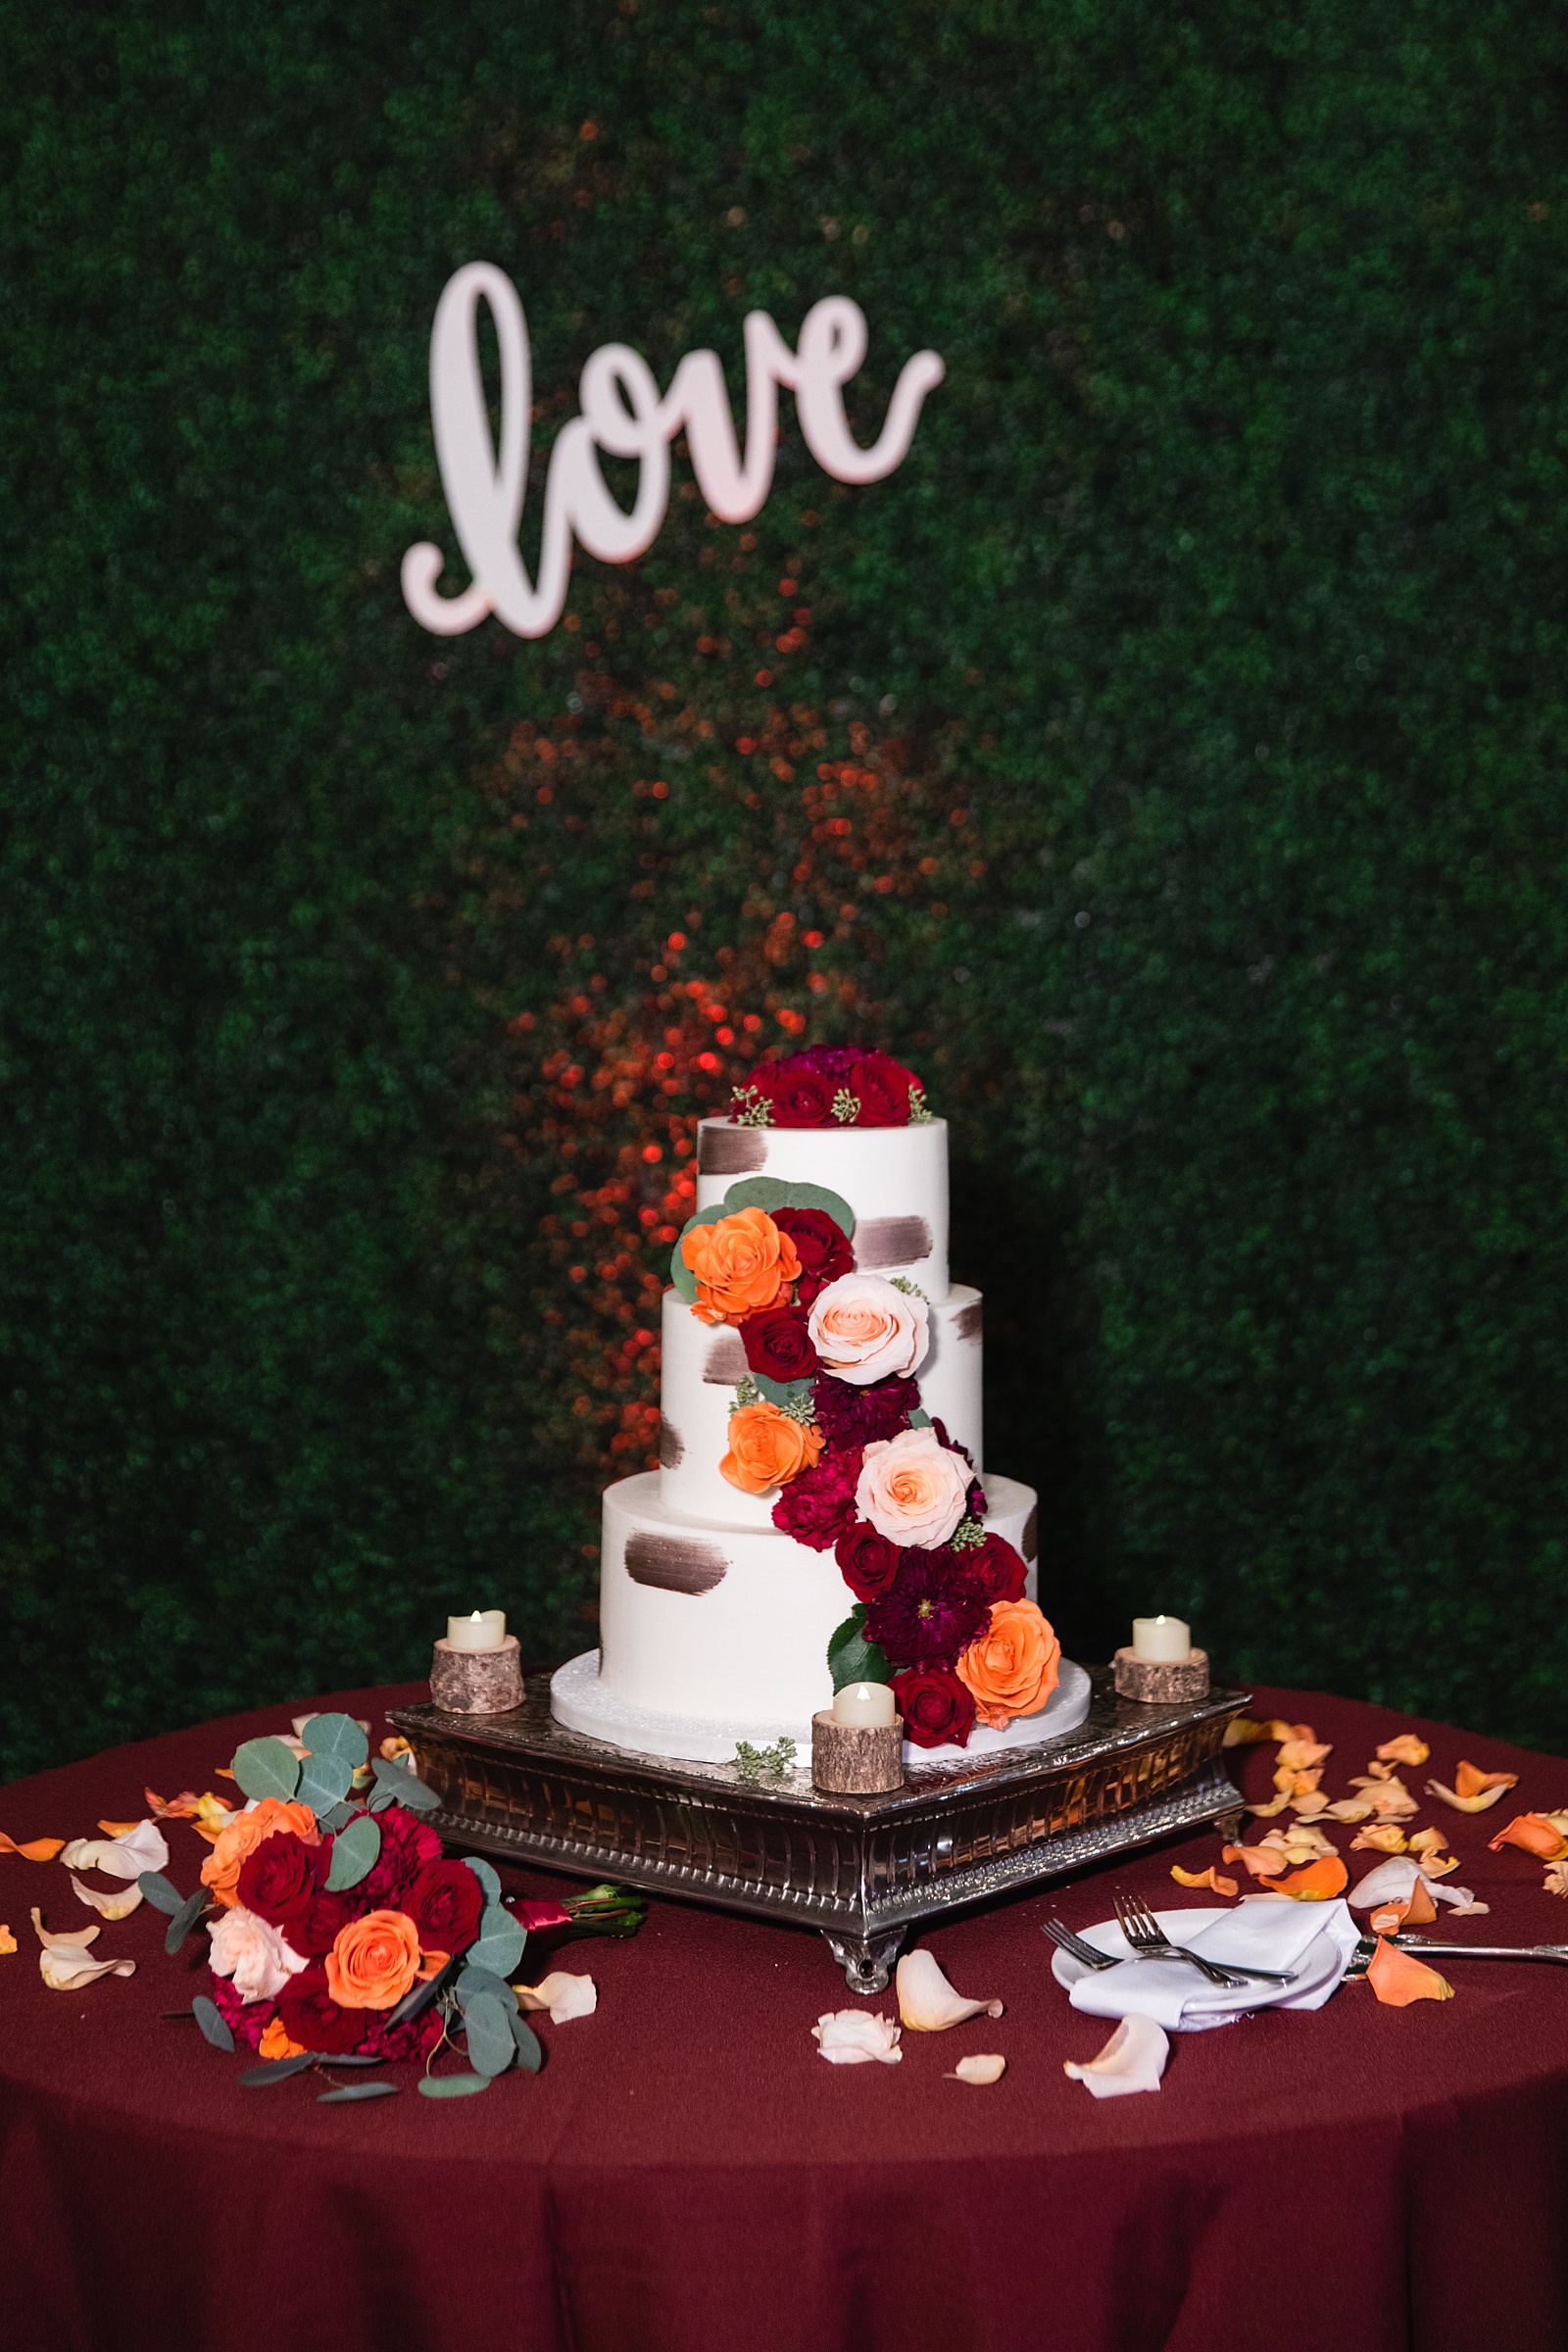 Cake table at Regency Garden wedding reception by Phoenix wedding photographer Juniper and Co Photography.